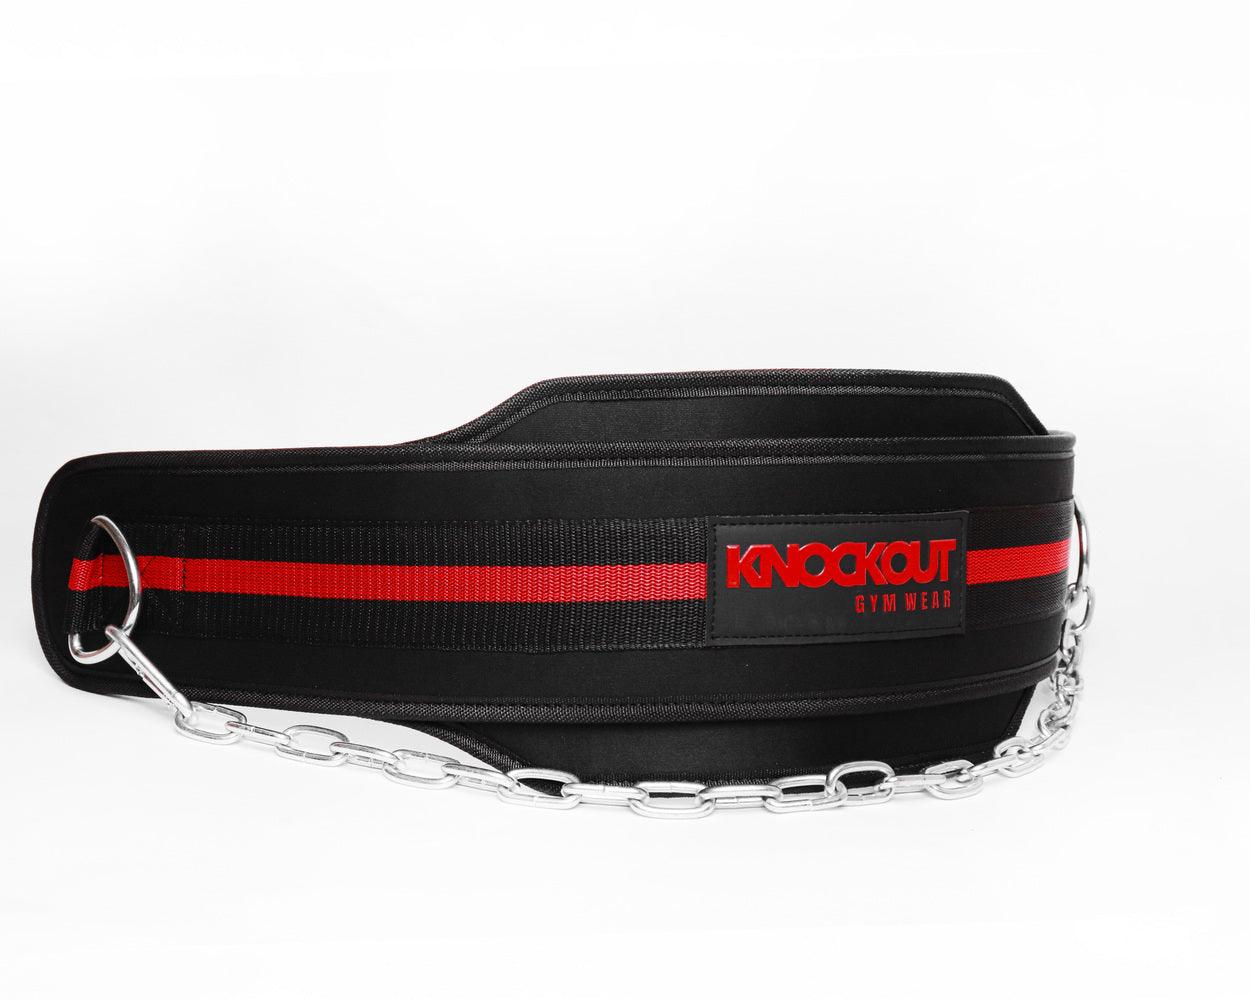 Upgrade your training with our Dip Belt, ideal for adding intensity. Our weighted dip belt is designed for durability and comfort during workouts.